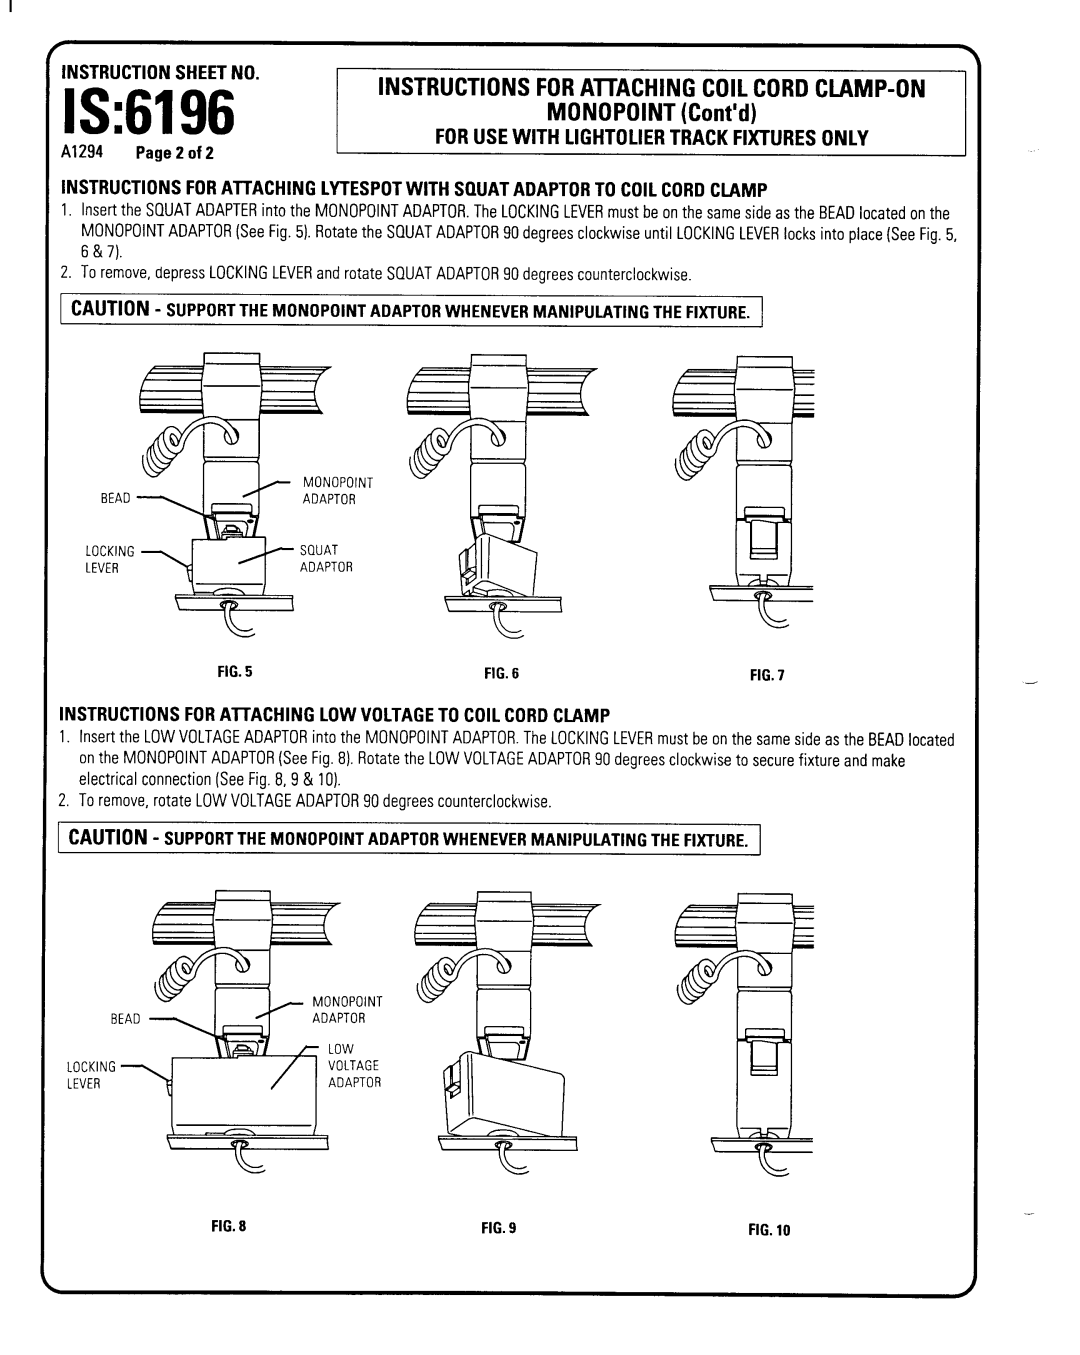 Lightolier 6196 instruction sheet 1S, Instructionsheetno, MONOPOINT Cent’d, Instructions For Aitaching Coil Cord Clamp-On 